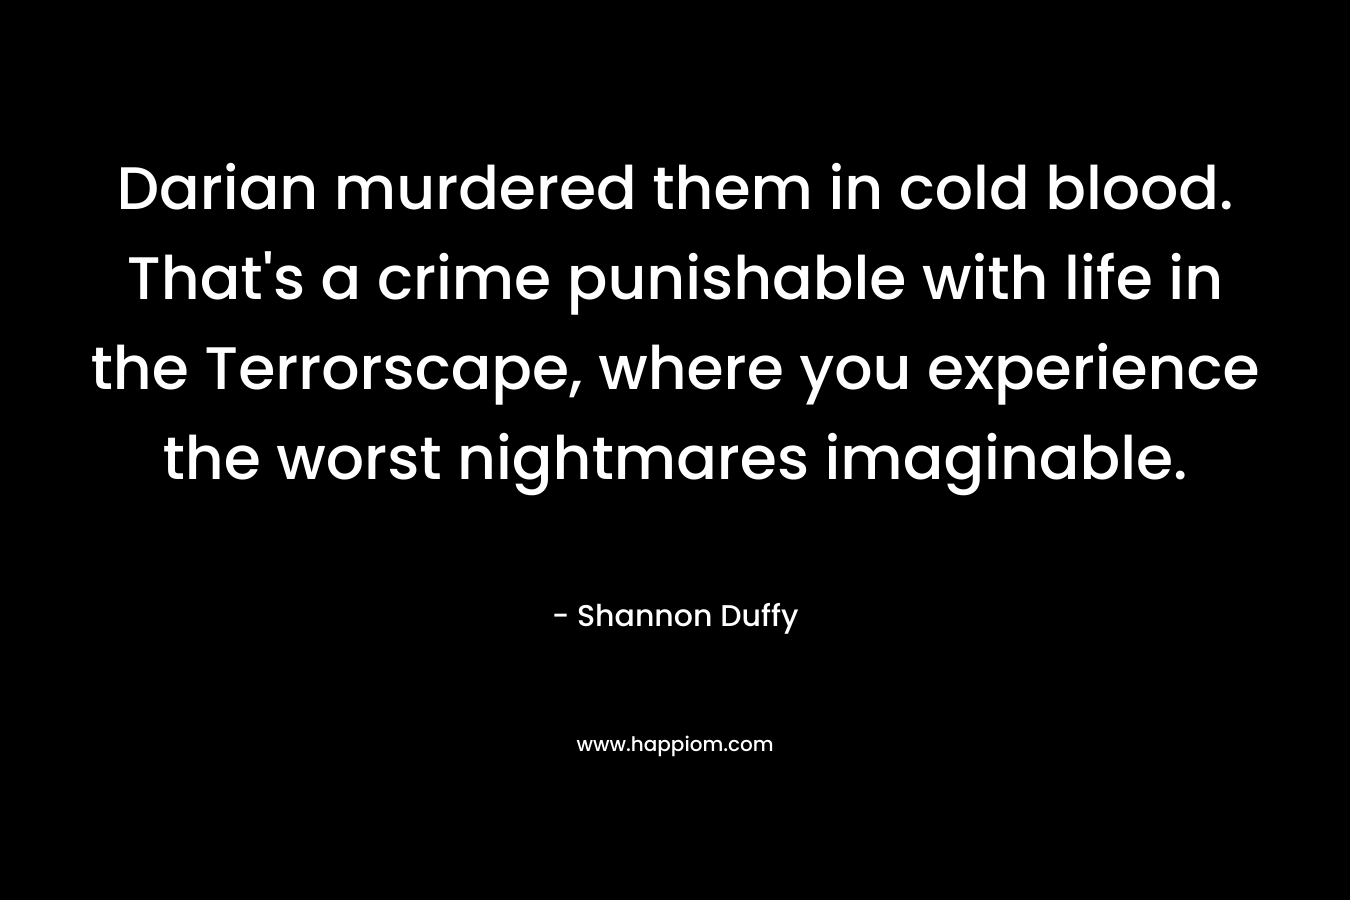 Darian murdered them in cold blood. That’s a crime punishable with life in the Terrorscape, where you experience the worst nightmares imaginable. – Shannon Duffy